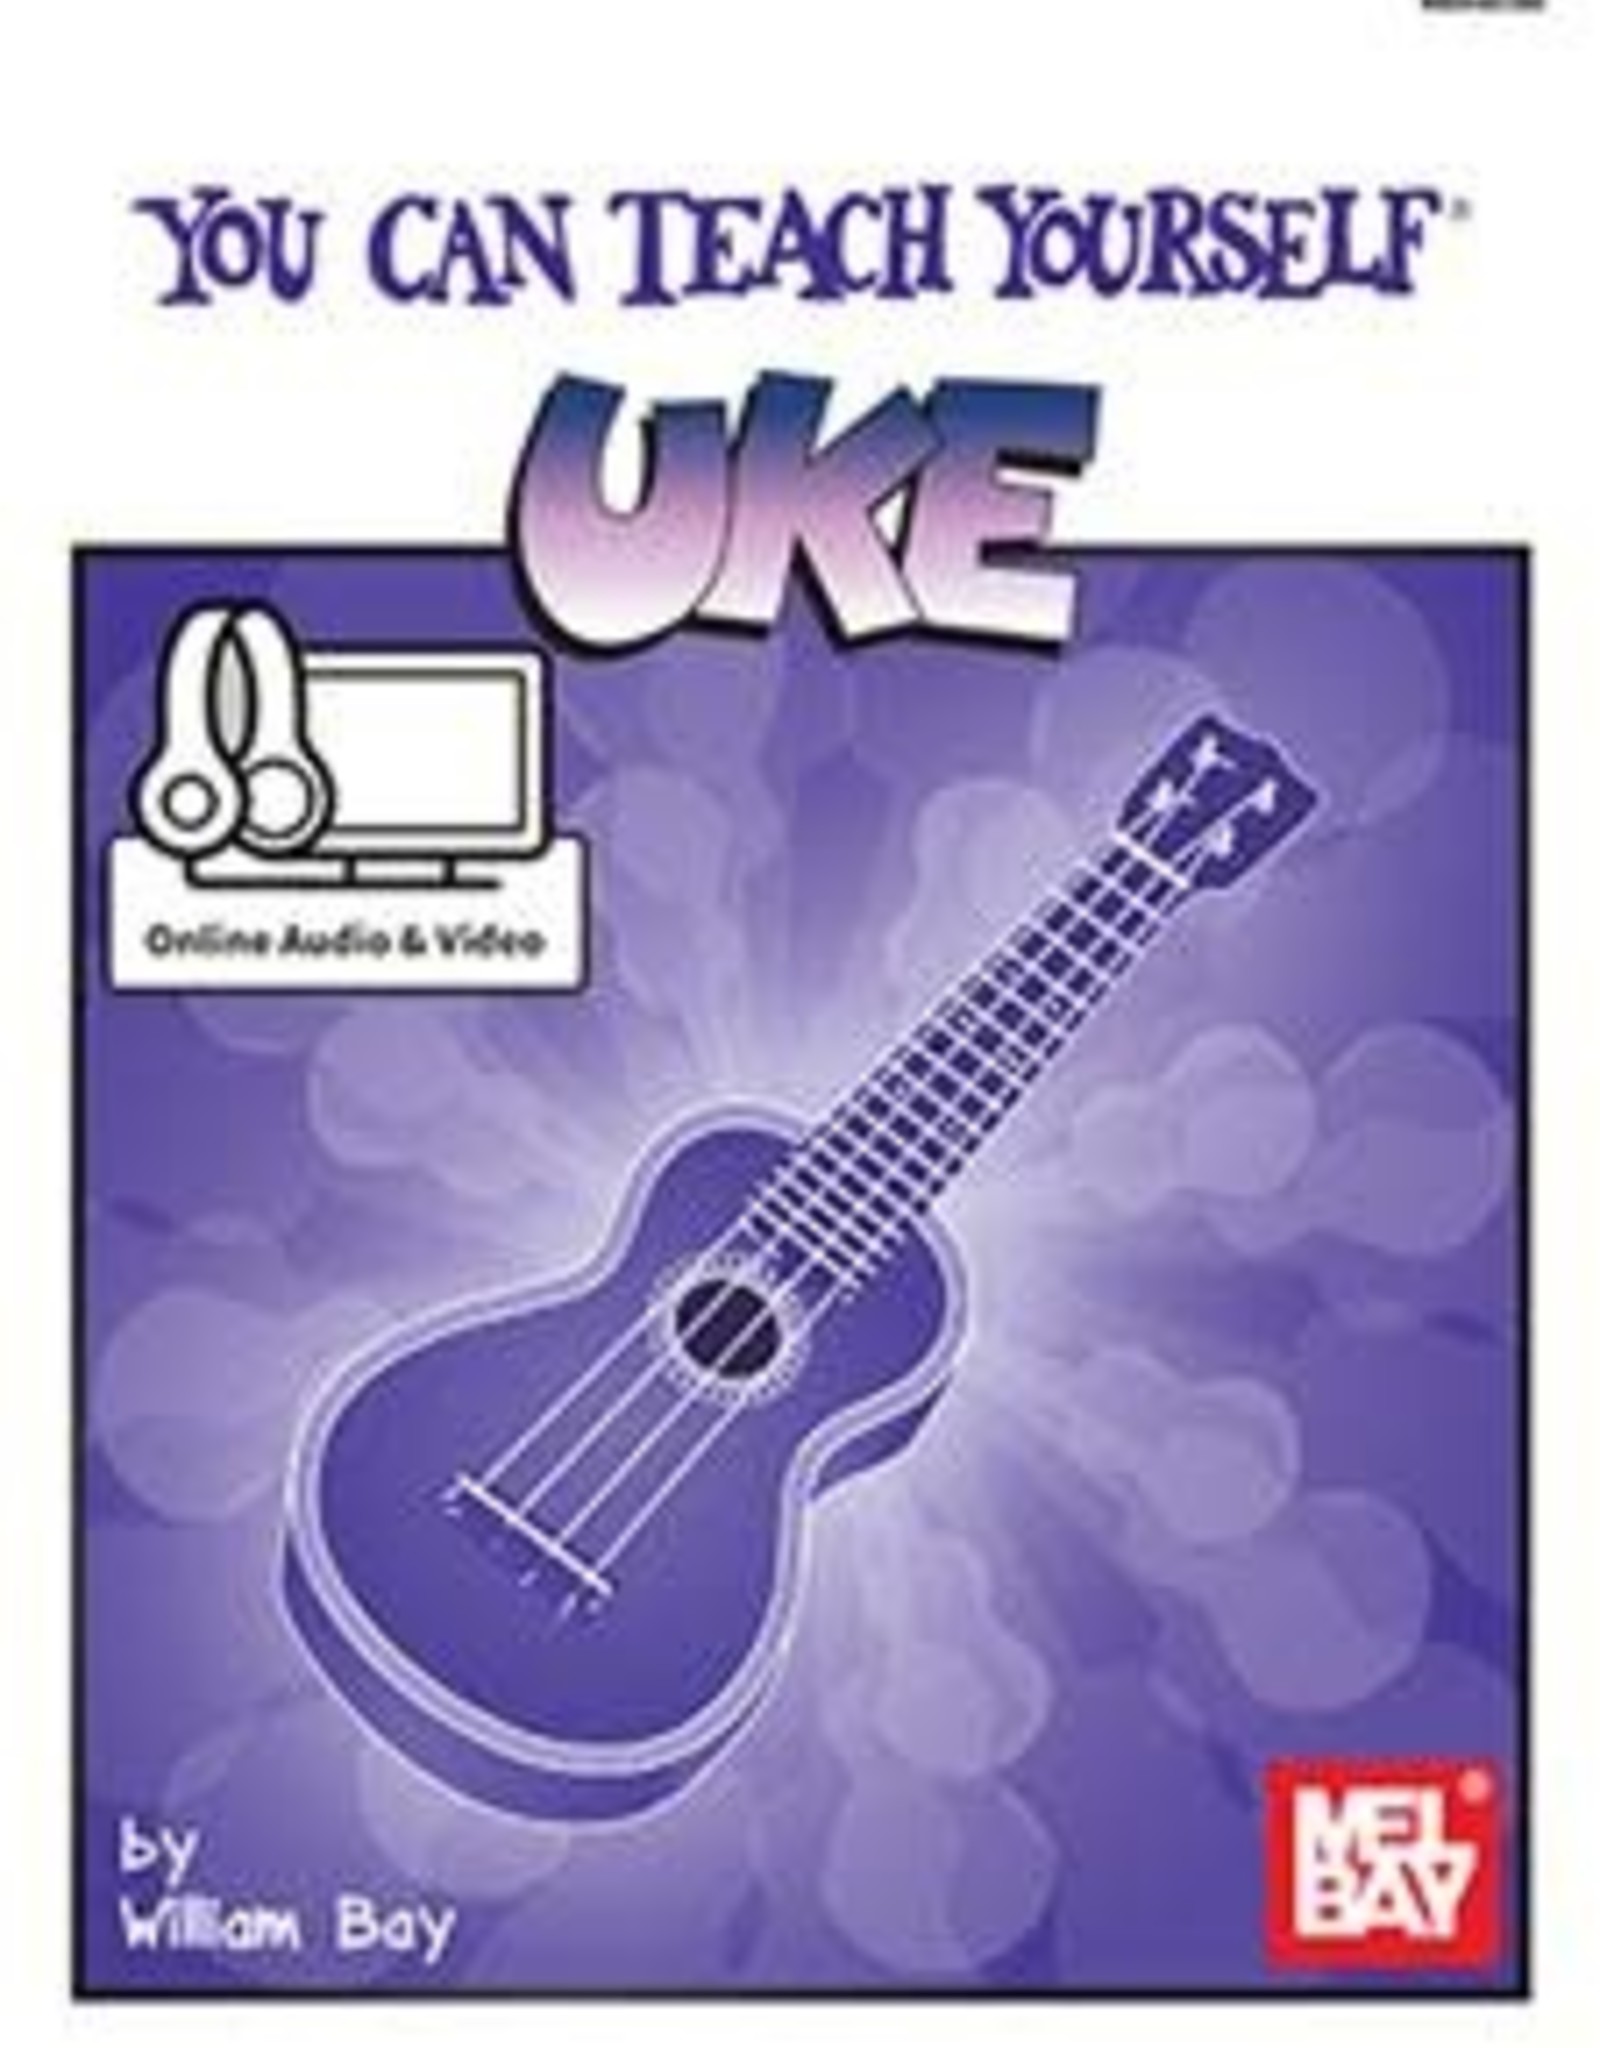 Mel Bay Publications, Inc. You Can Teach Yourself Uke by William Bay with Online Access